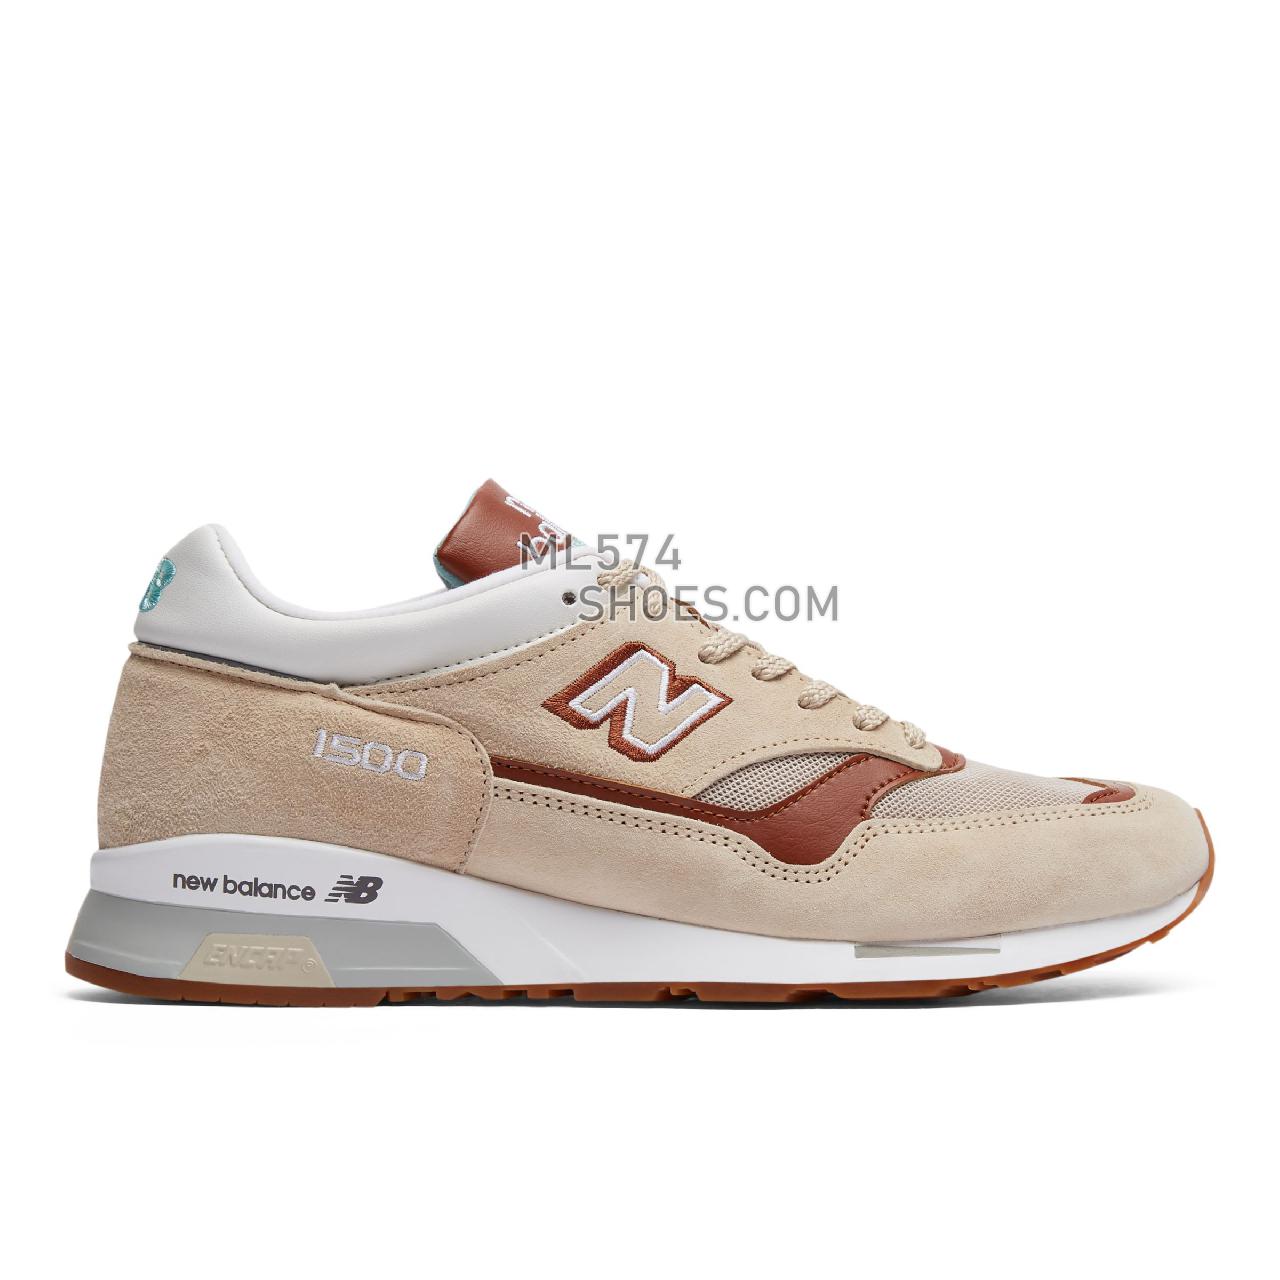 New Balance MADE UK 1500 - Men's Made in USA And UK Sneakers - Oatmeal with Brown - M1500STT